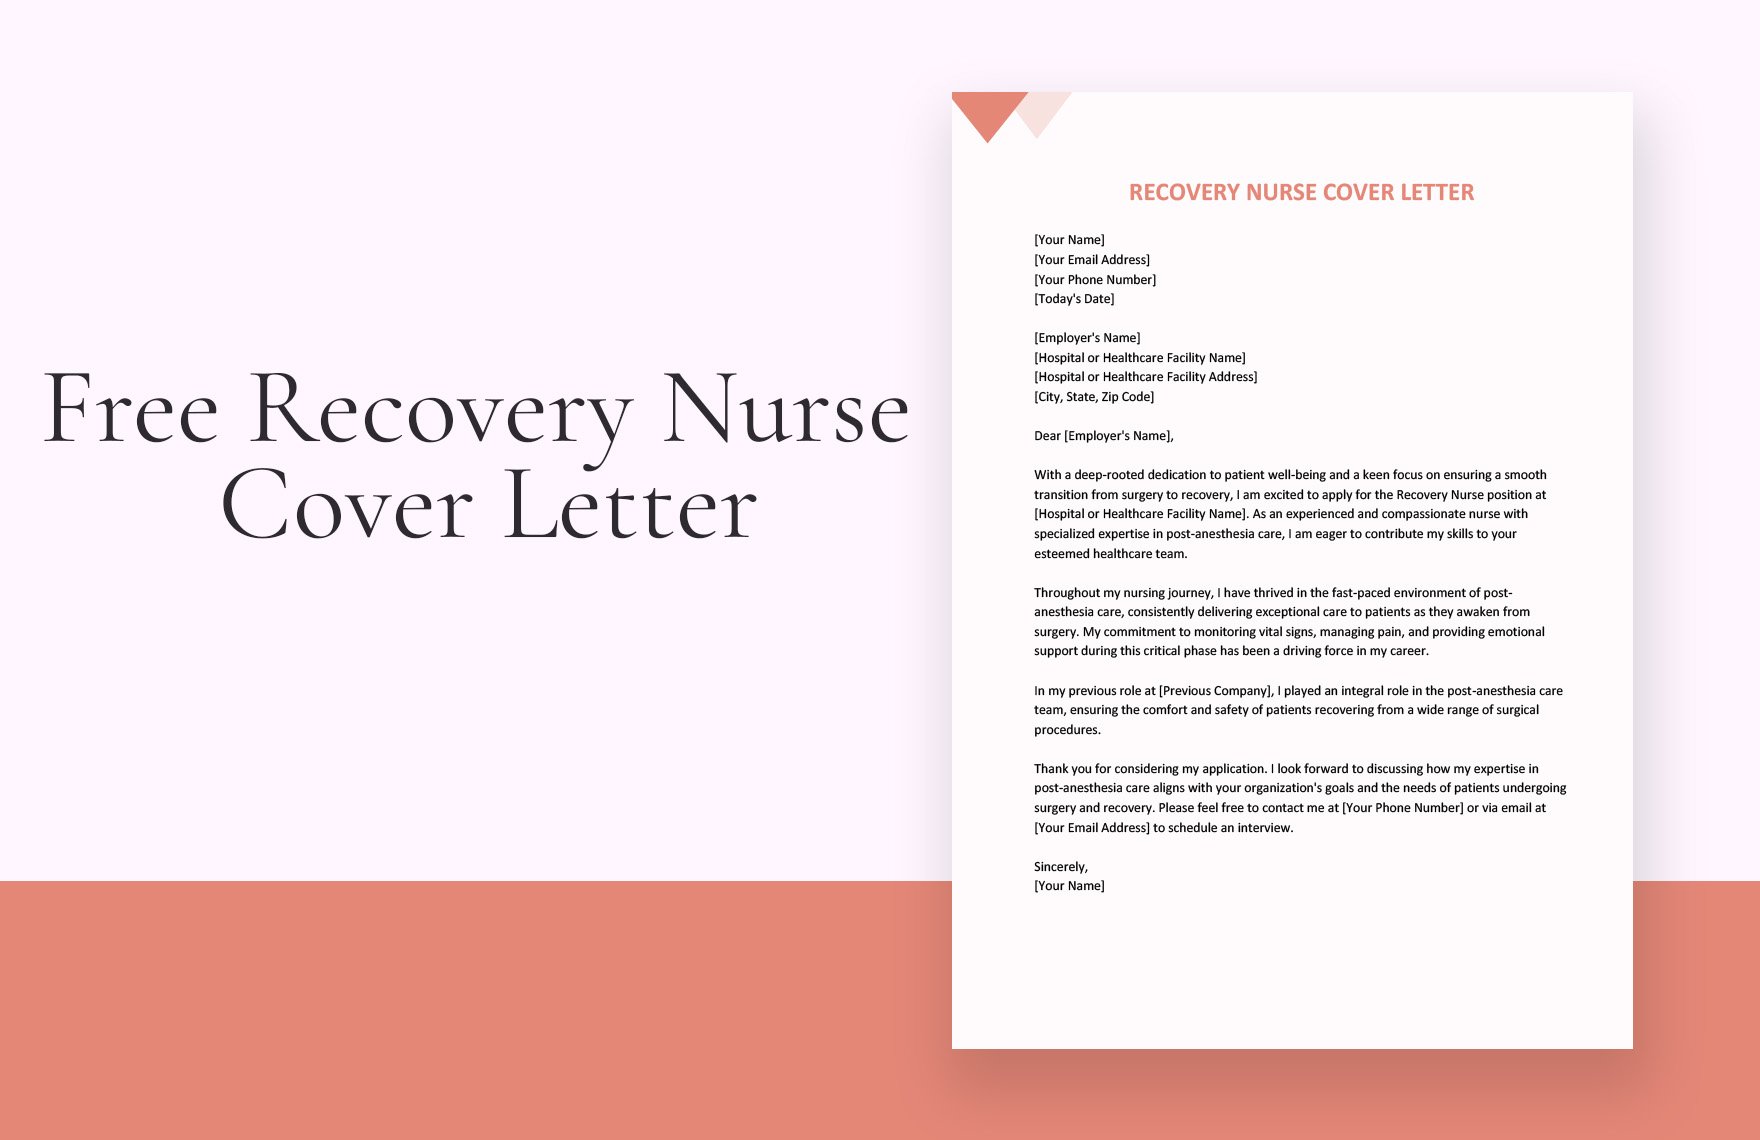 Recovery Nurse Cover Letter in Word, Google Docs